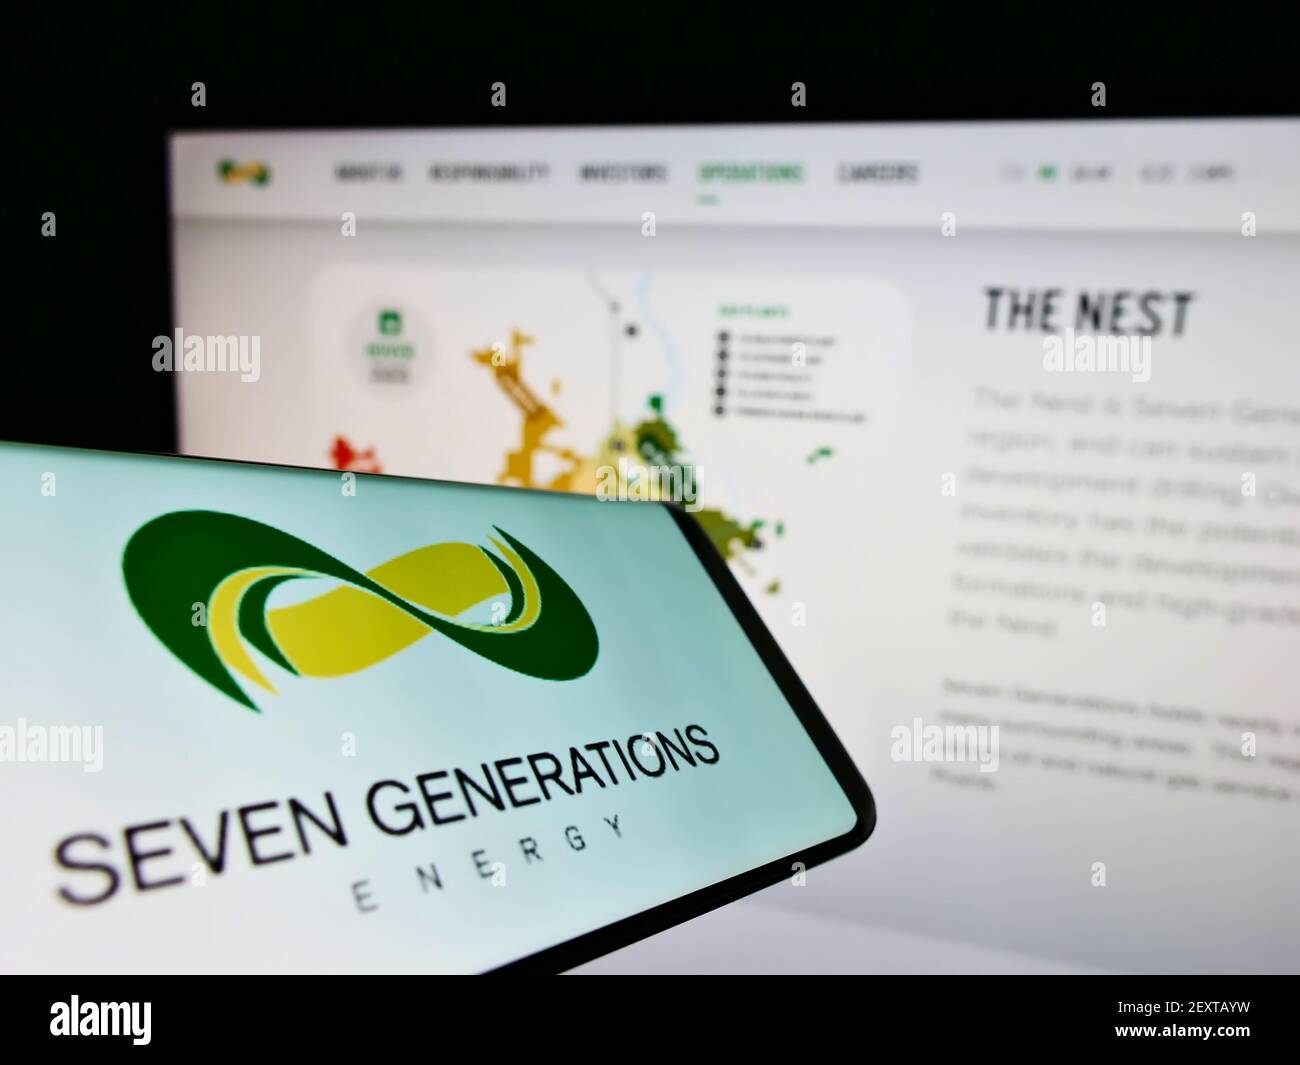 Cellphone with logo of oil and gas company Seven Generations Energy Ltd. on screen in front of website. Focus on center-right of phone display. Stock Photo